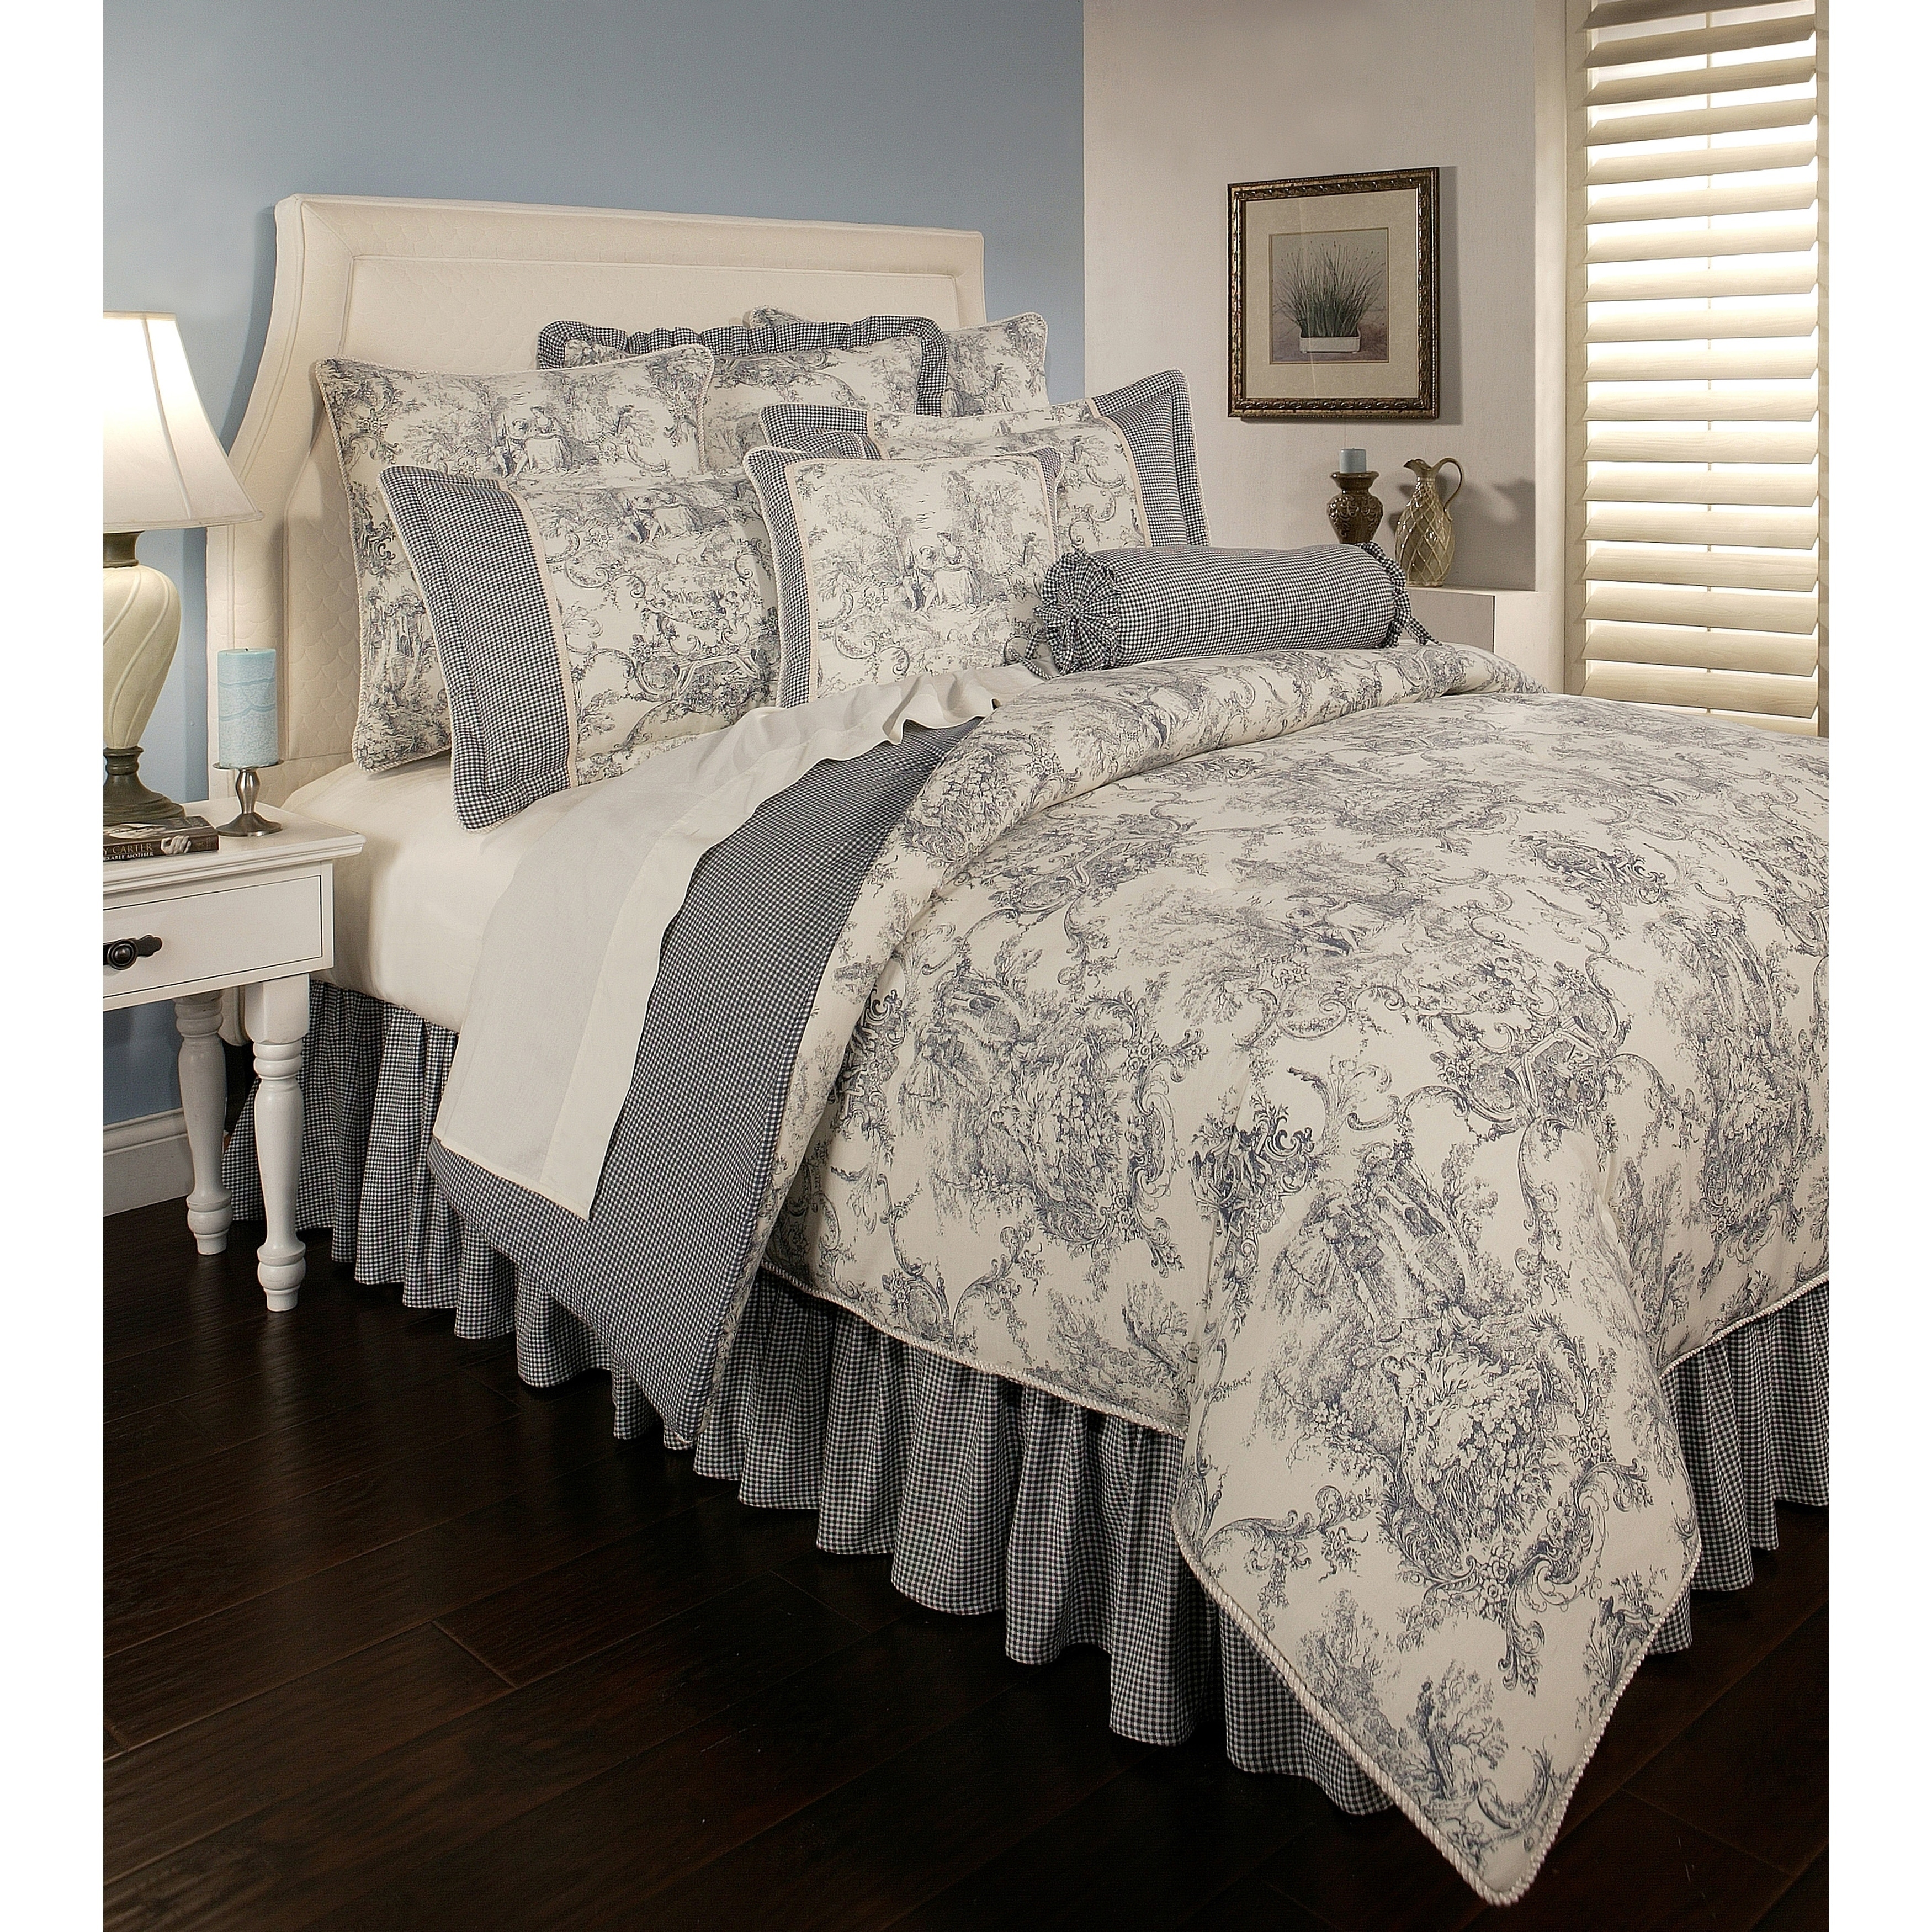 Shop Pchf Country Toile Blue 3 Piece Duvet Set Free Shipping